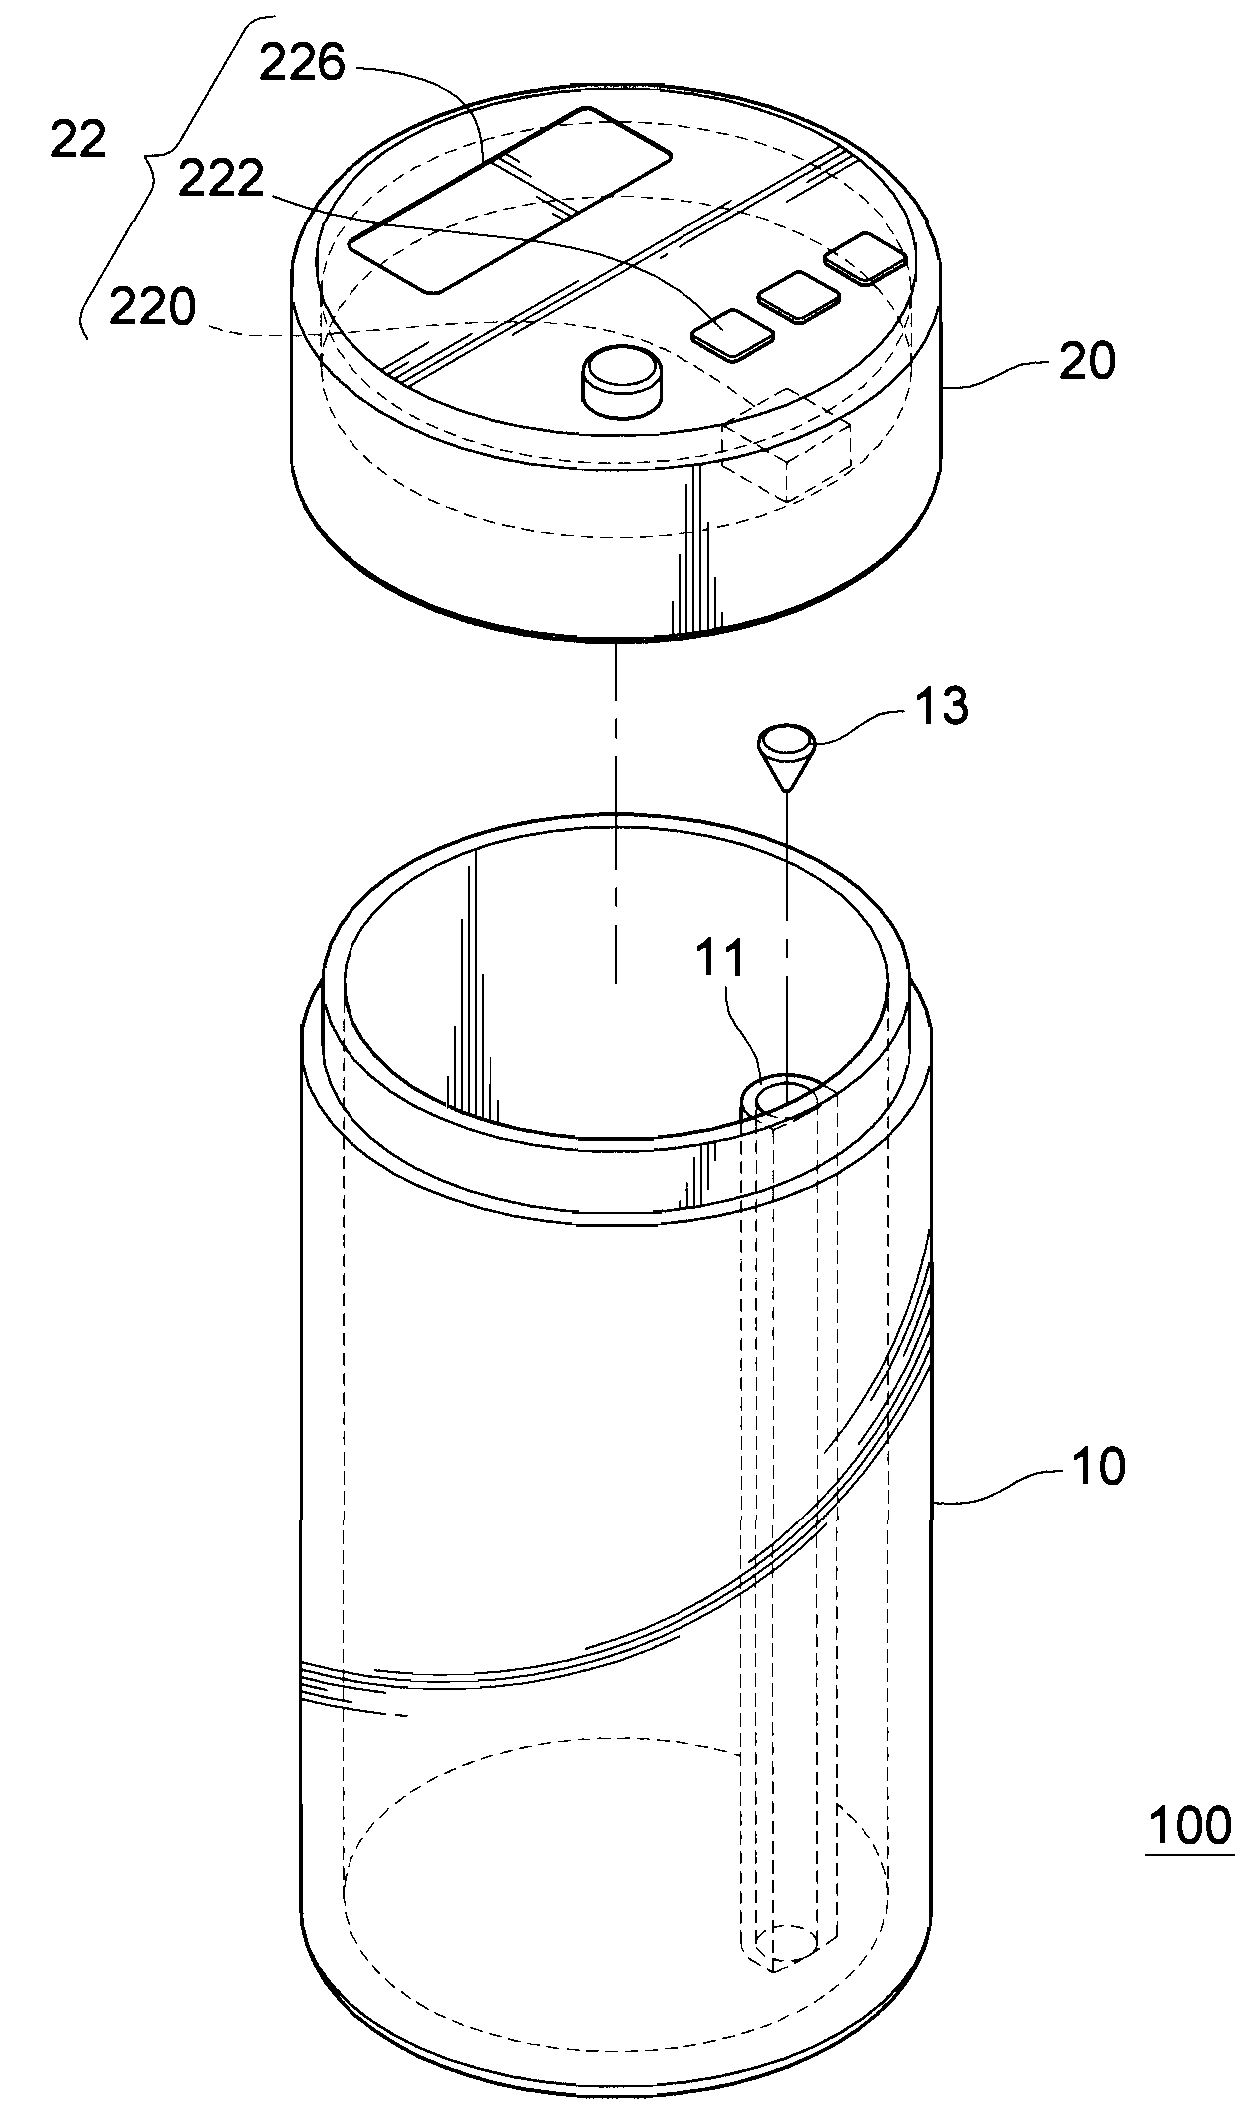 Water intake amount management device